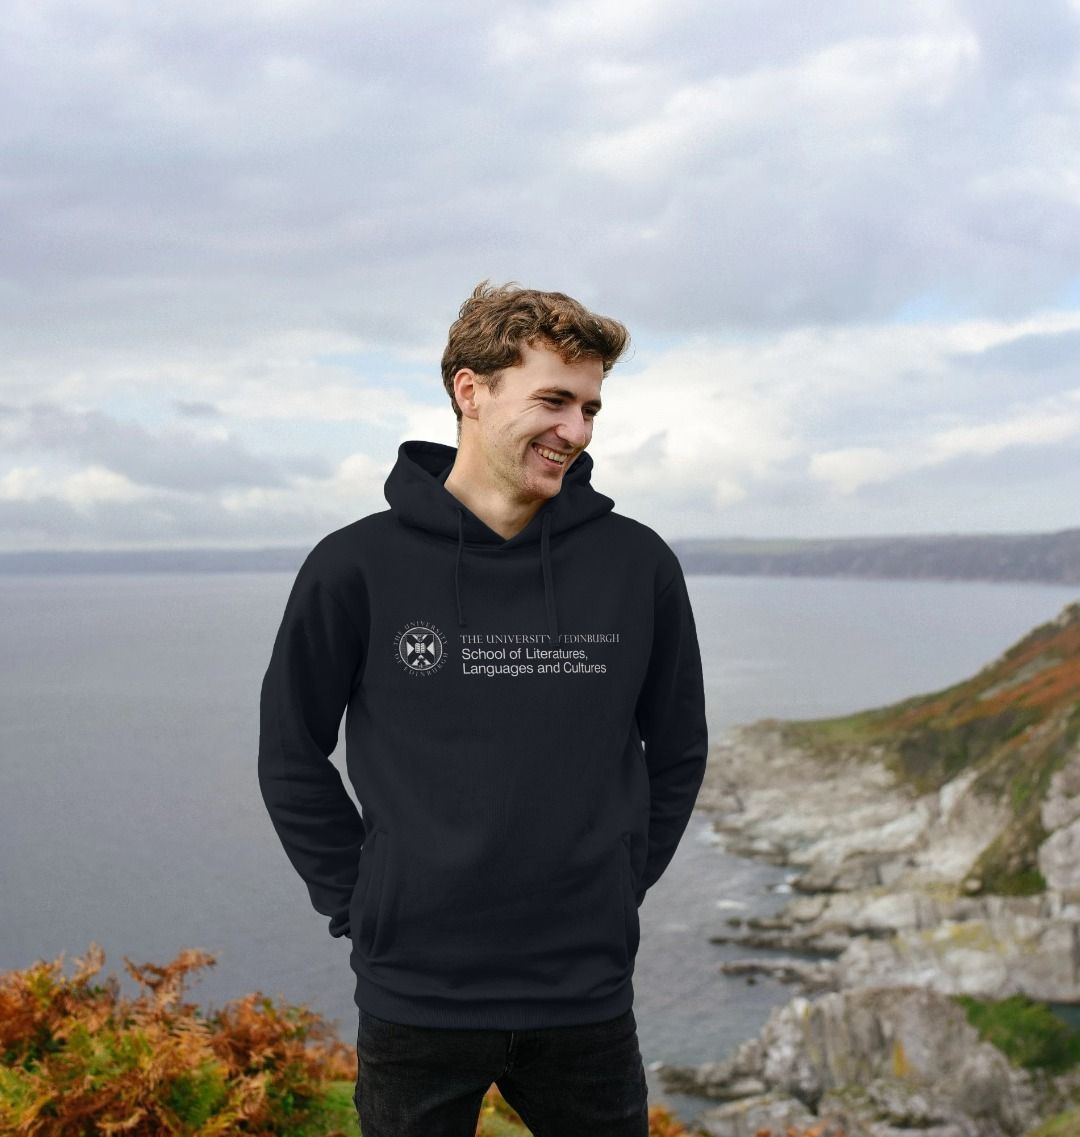 A model wearing our School of Literatures, Languages and Cultures Hoodie